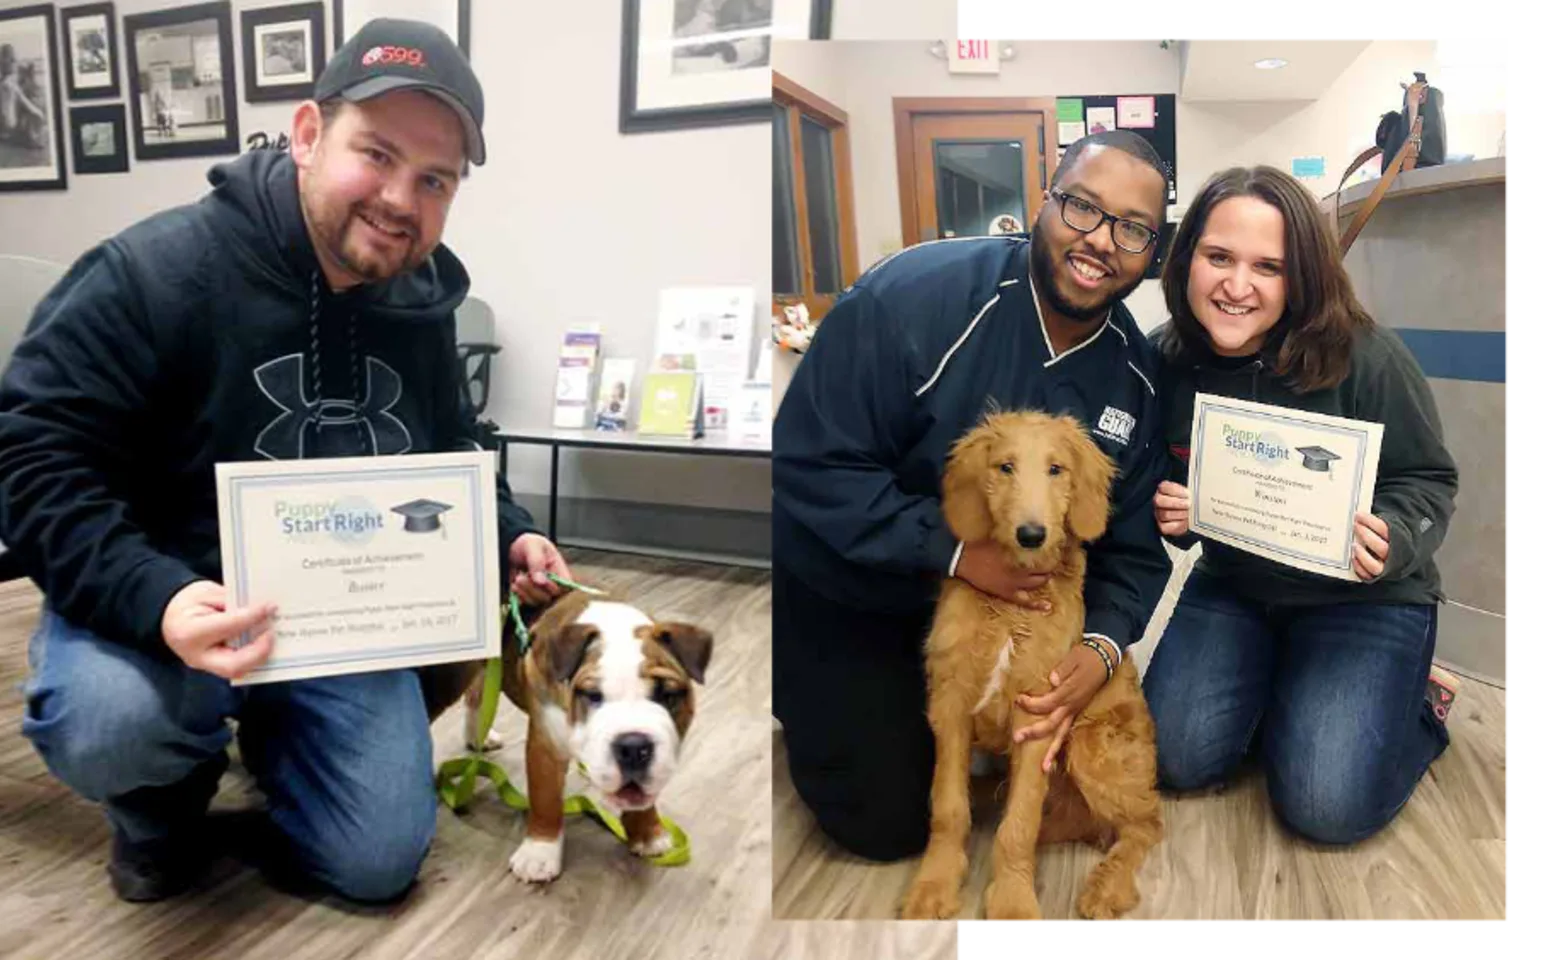 Owners with their Dogs & Awards at New Haven Pet Hospital